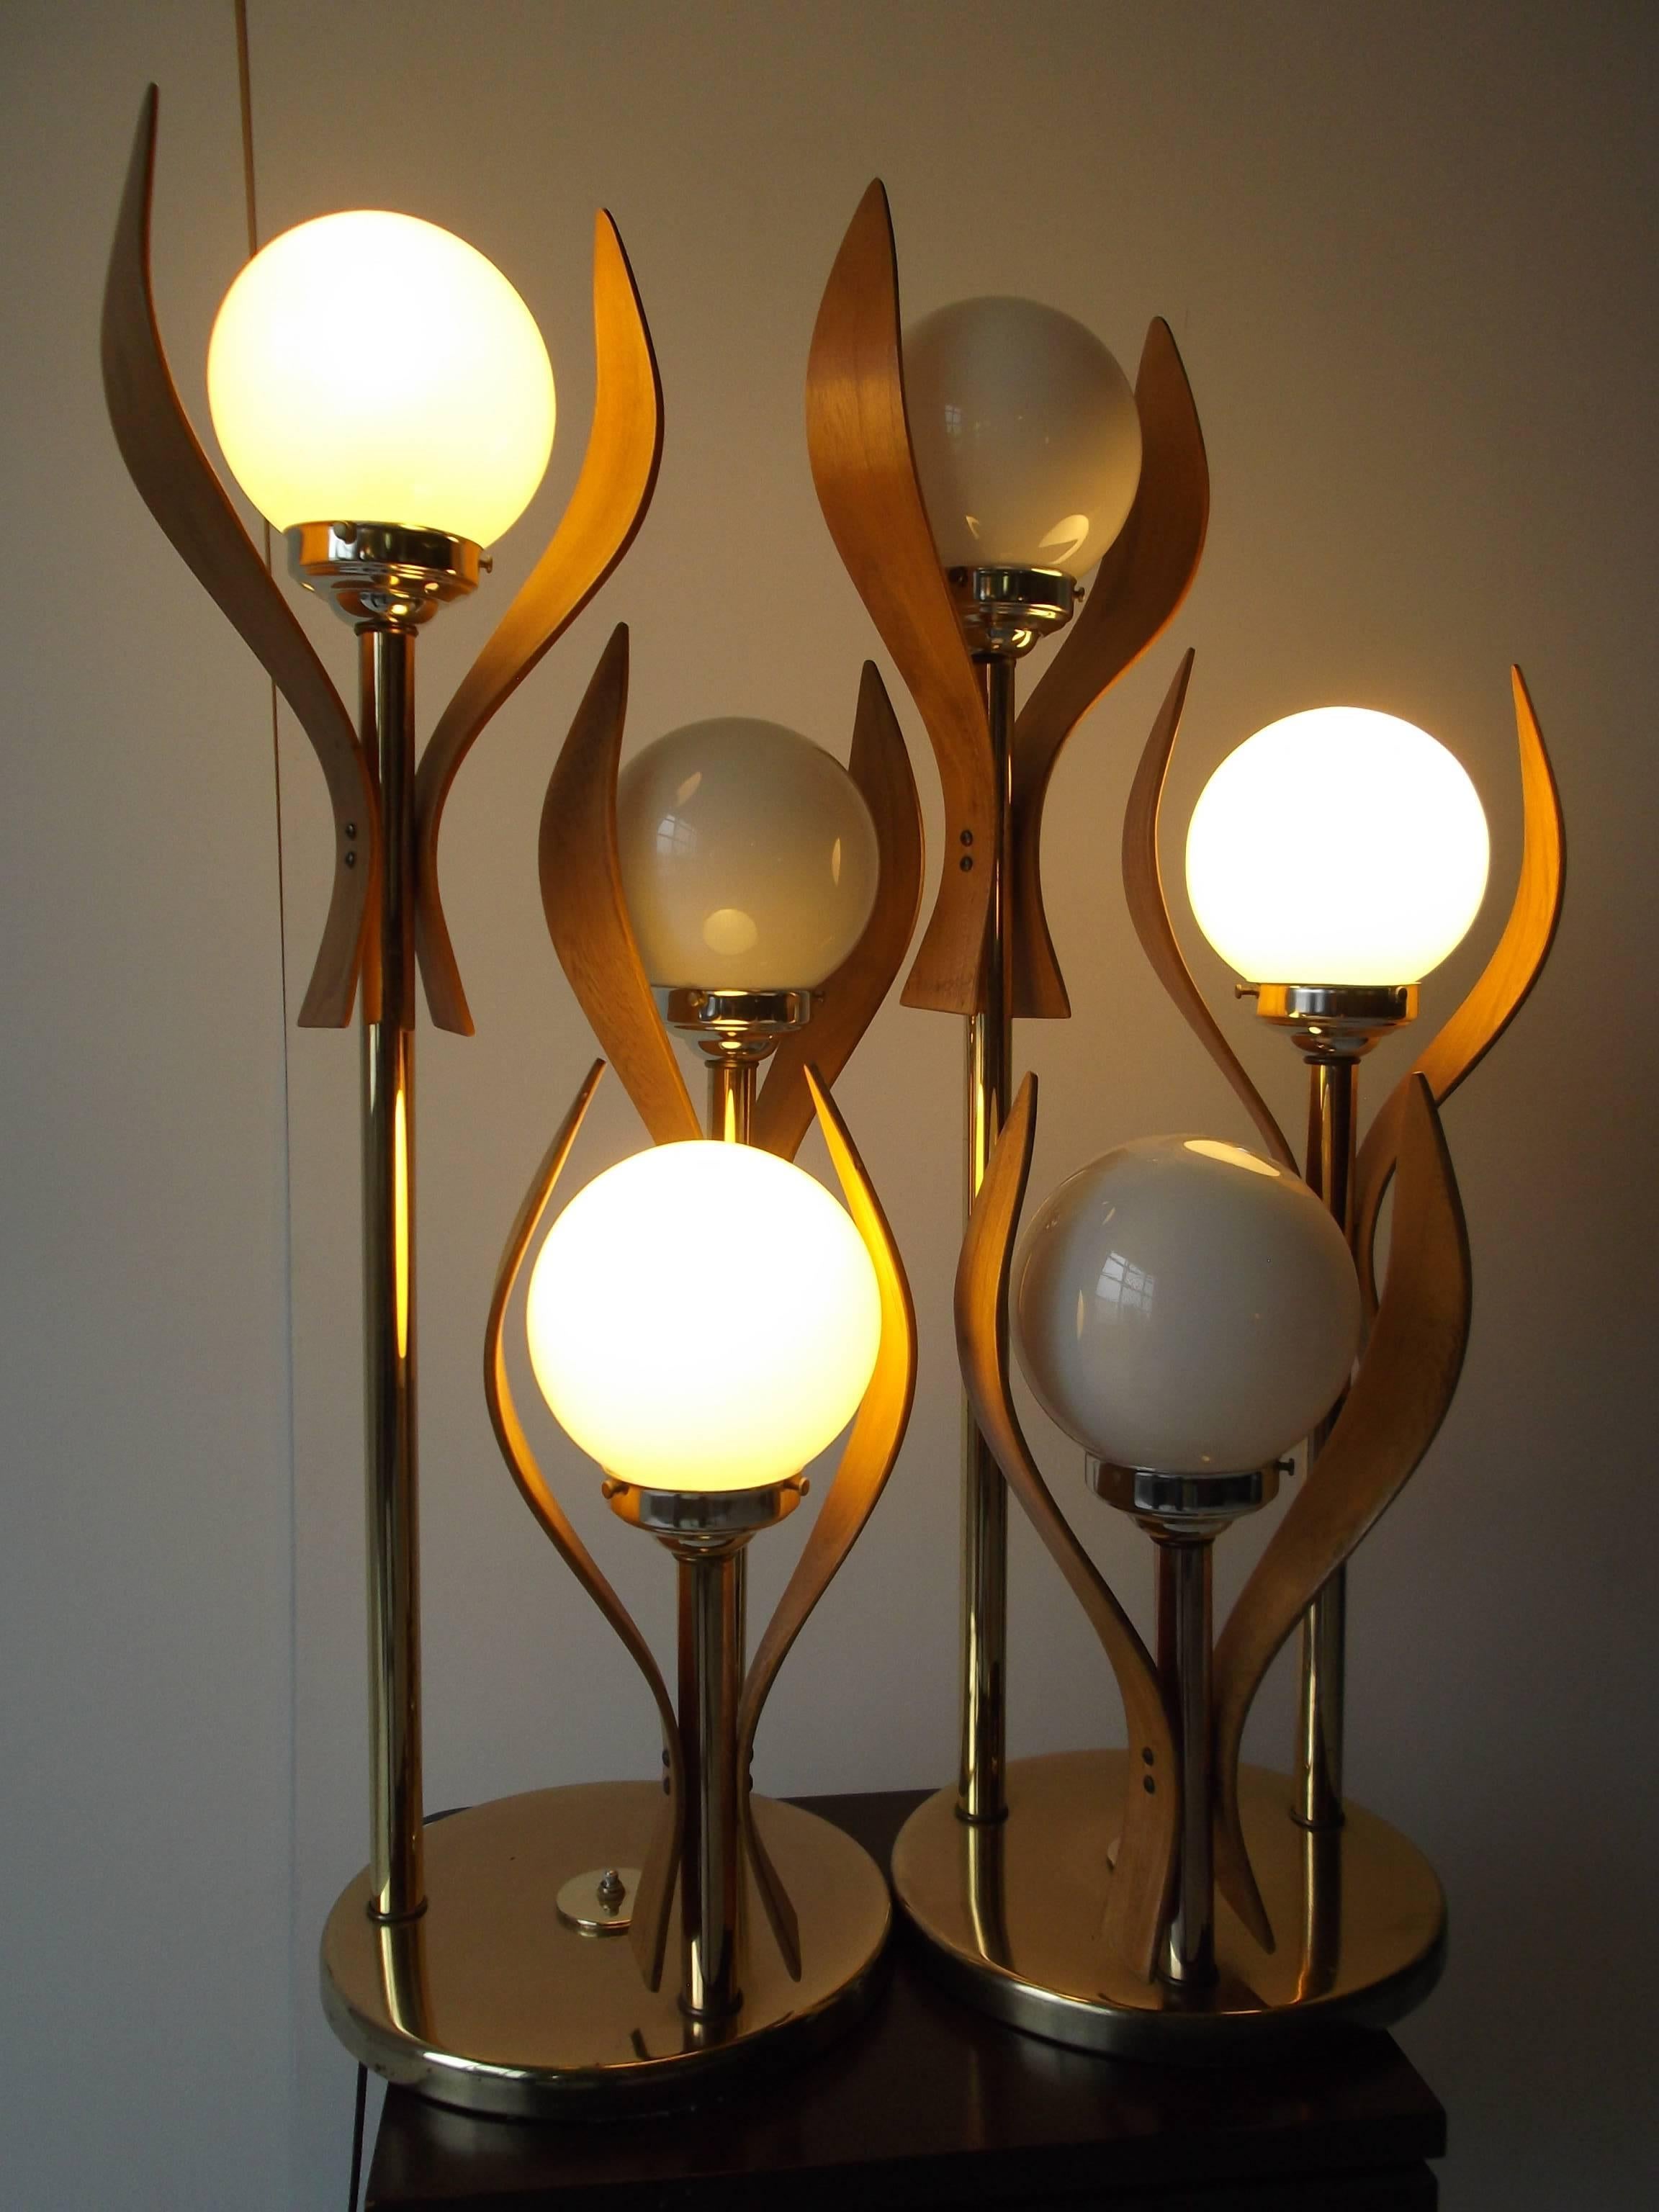 Pair of vintage unusual table lamps from circa 1970. They are in the form of abstract flowers, with bentwood leaves, on brass stems. They are amzzing in person and very sculptural. The switches are three-way, so you can have one lamp on, or the